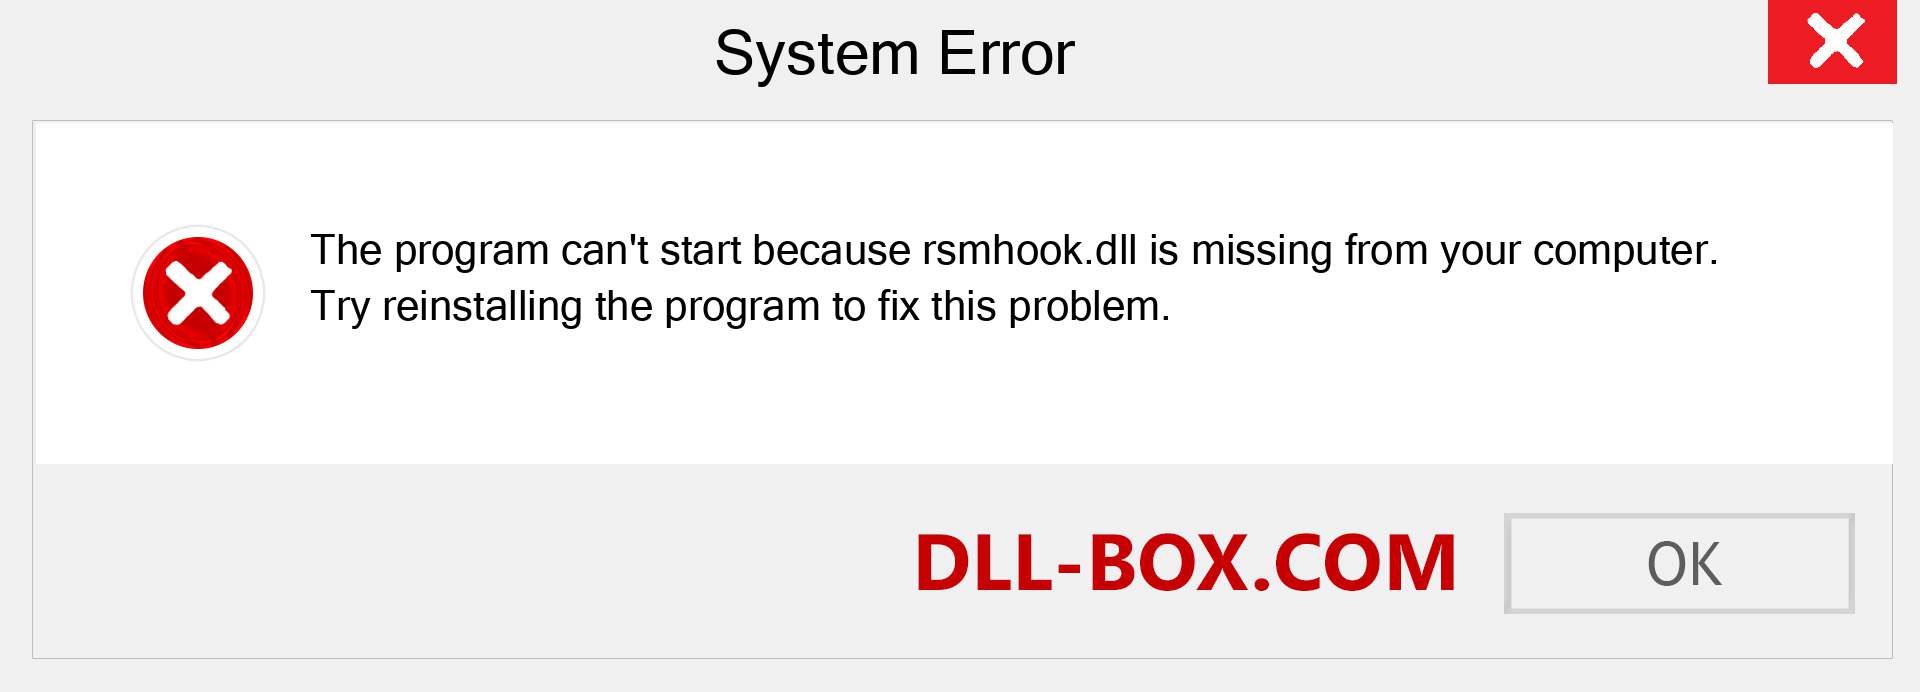  rsmhook.dll file is missing?. Download for Windows 7, 8, 10 - Fix  rsmhook dll Missing Error on Windows, photos, images